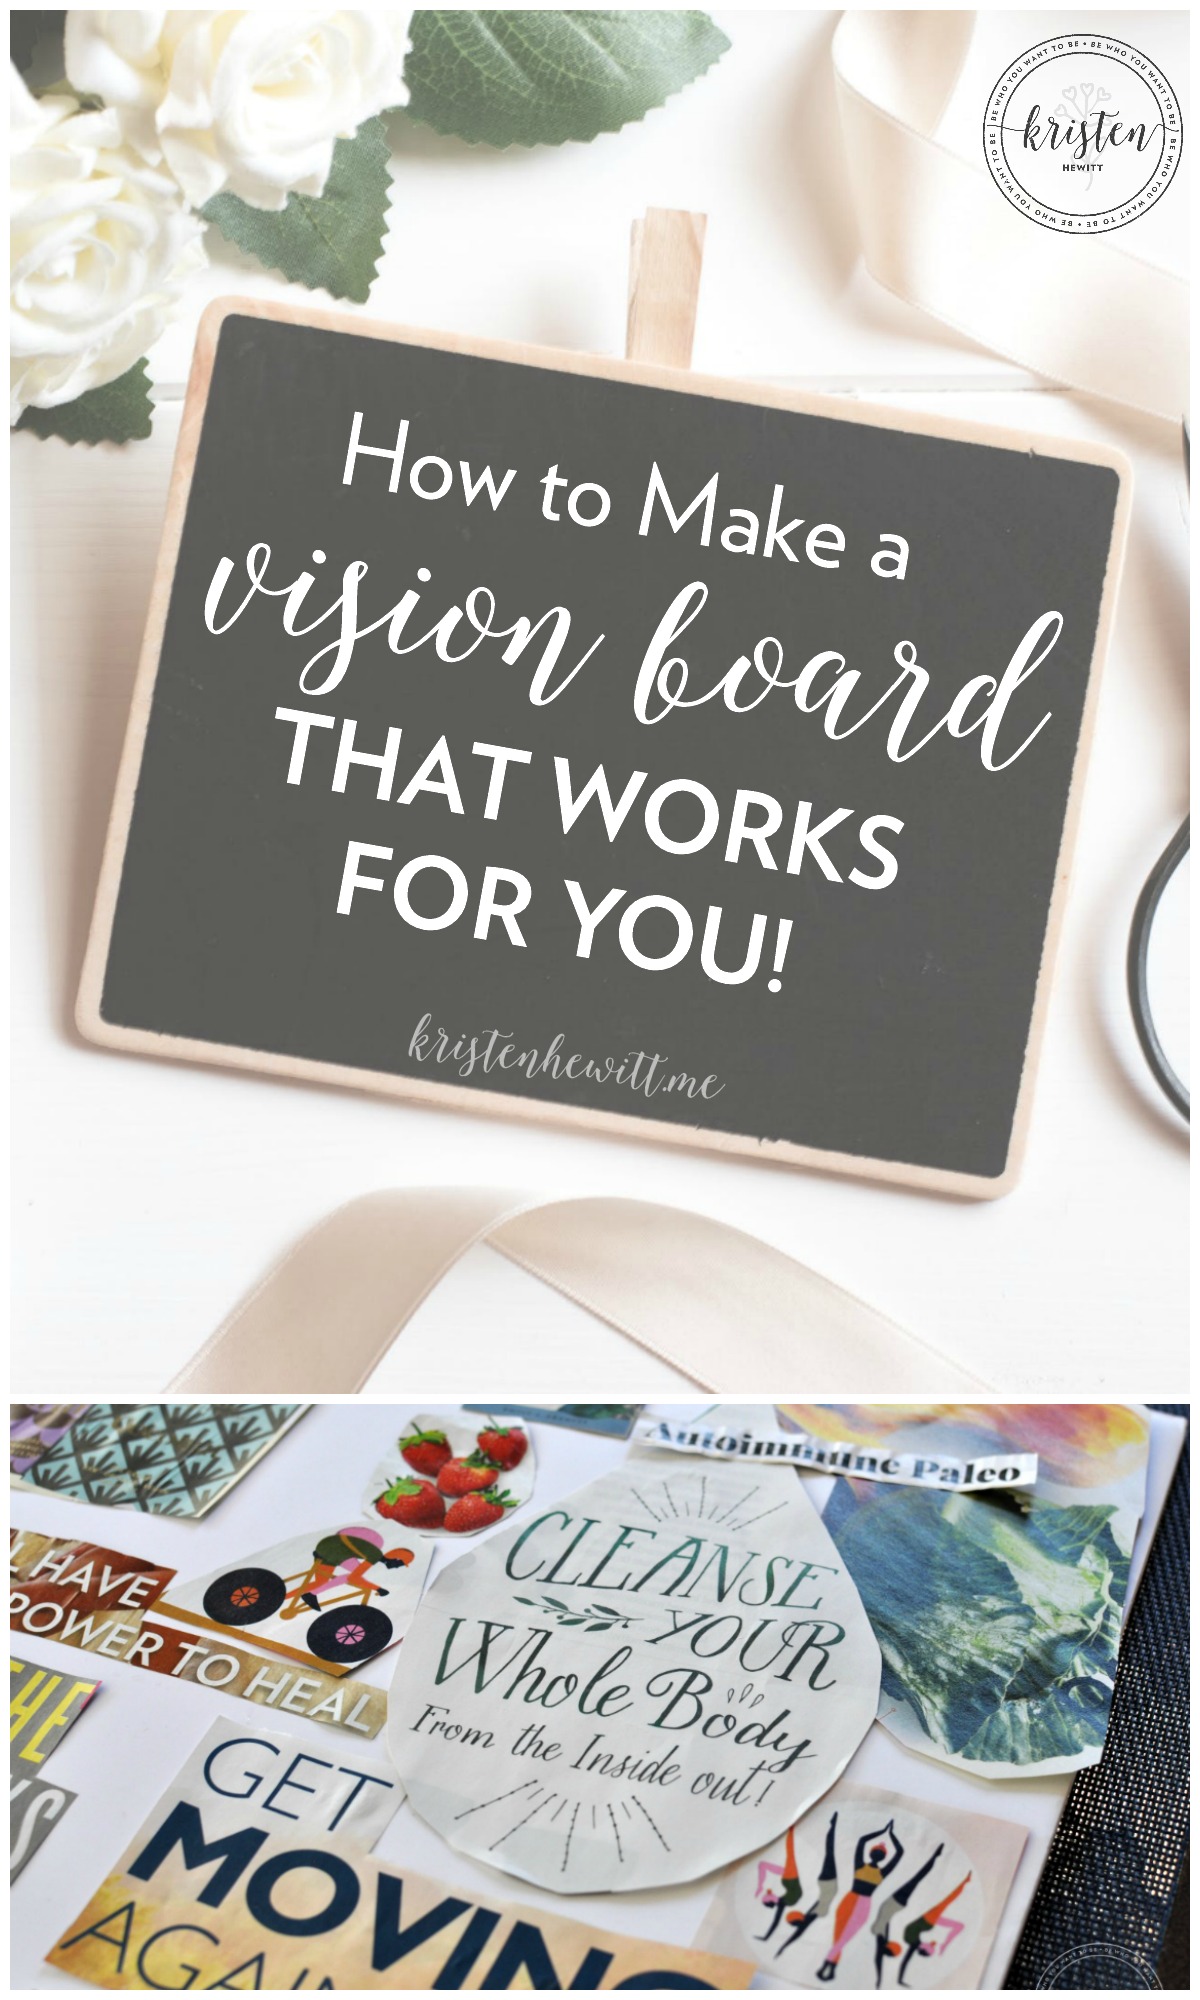 How To Make a Vision Board that Works for You - Kristen Hewitt